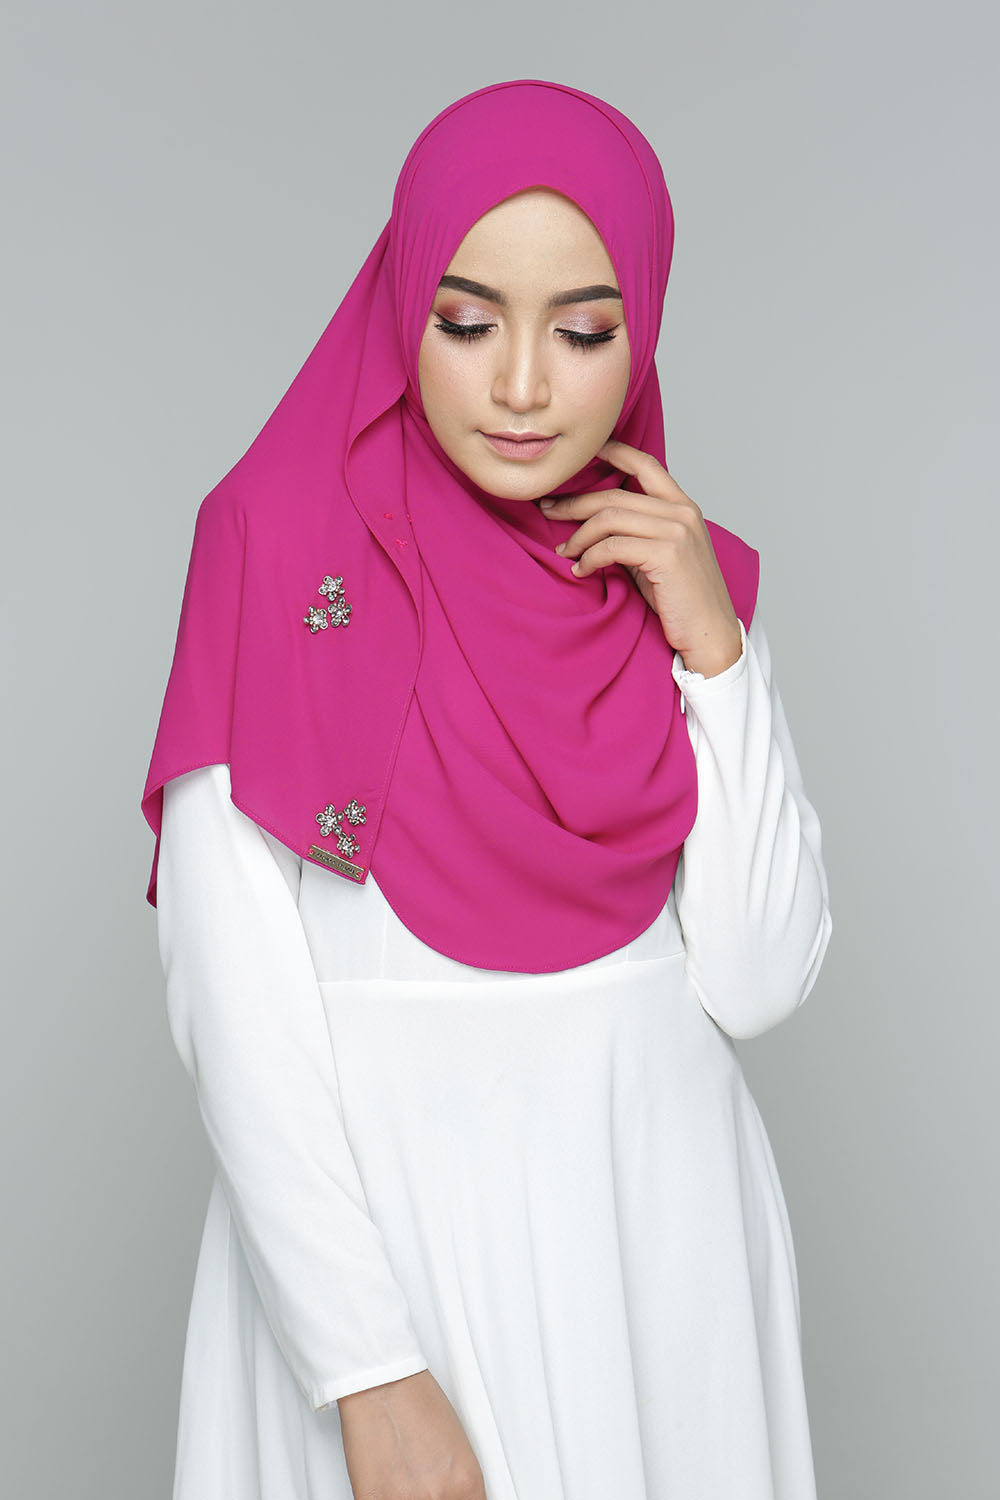 BUTTERFLY BLACK ROSE - BR01 (FUCHSIA PINK)